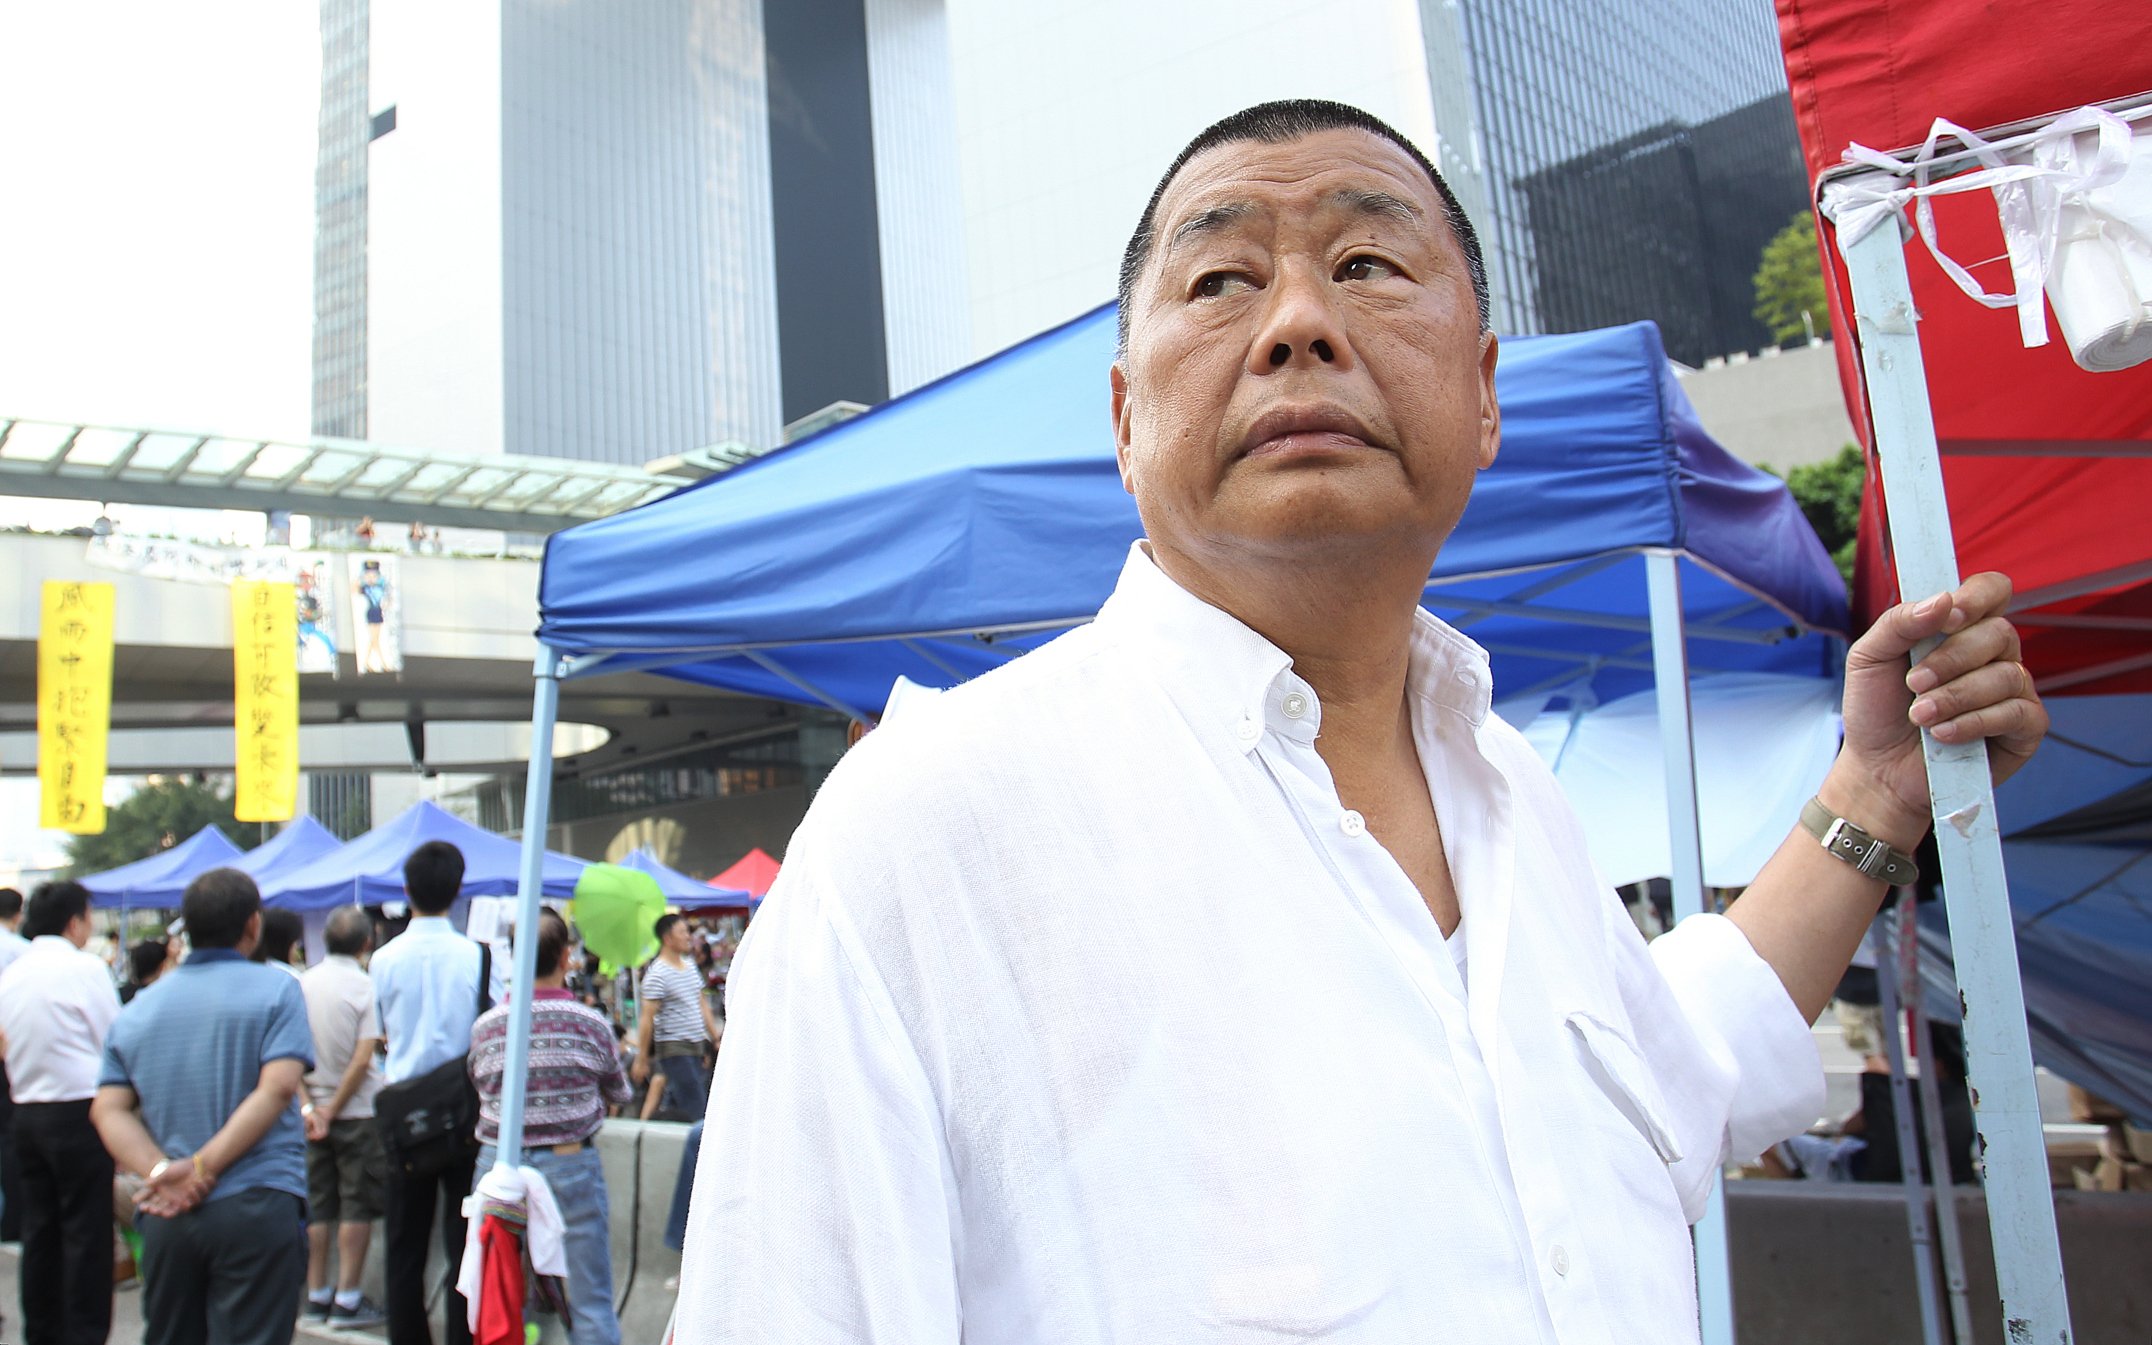 Next Media Chairman Jimmy Lai Chee-ying in Admiralty during 'Occupy Central with Love and Peace' movement. Photo: Dickson Lee